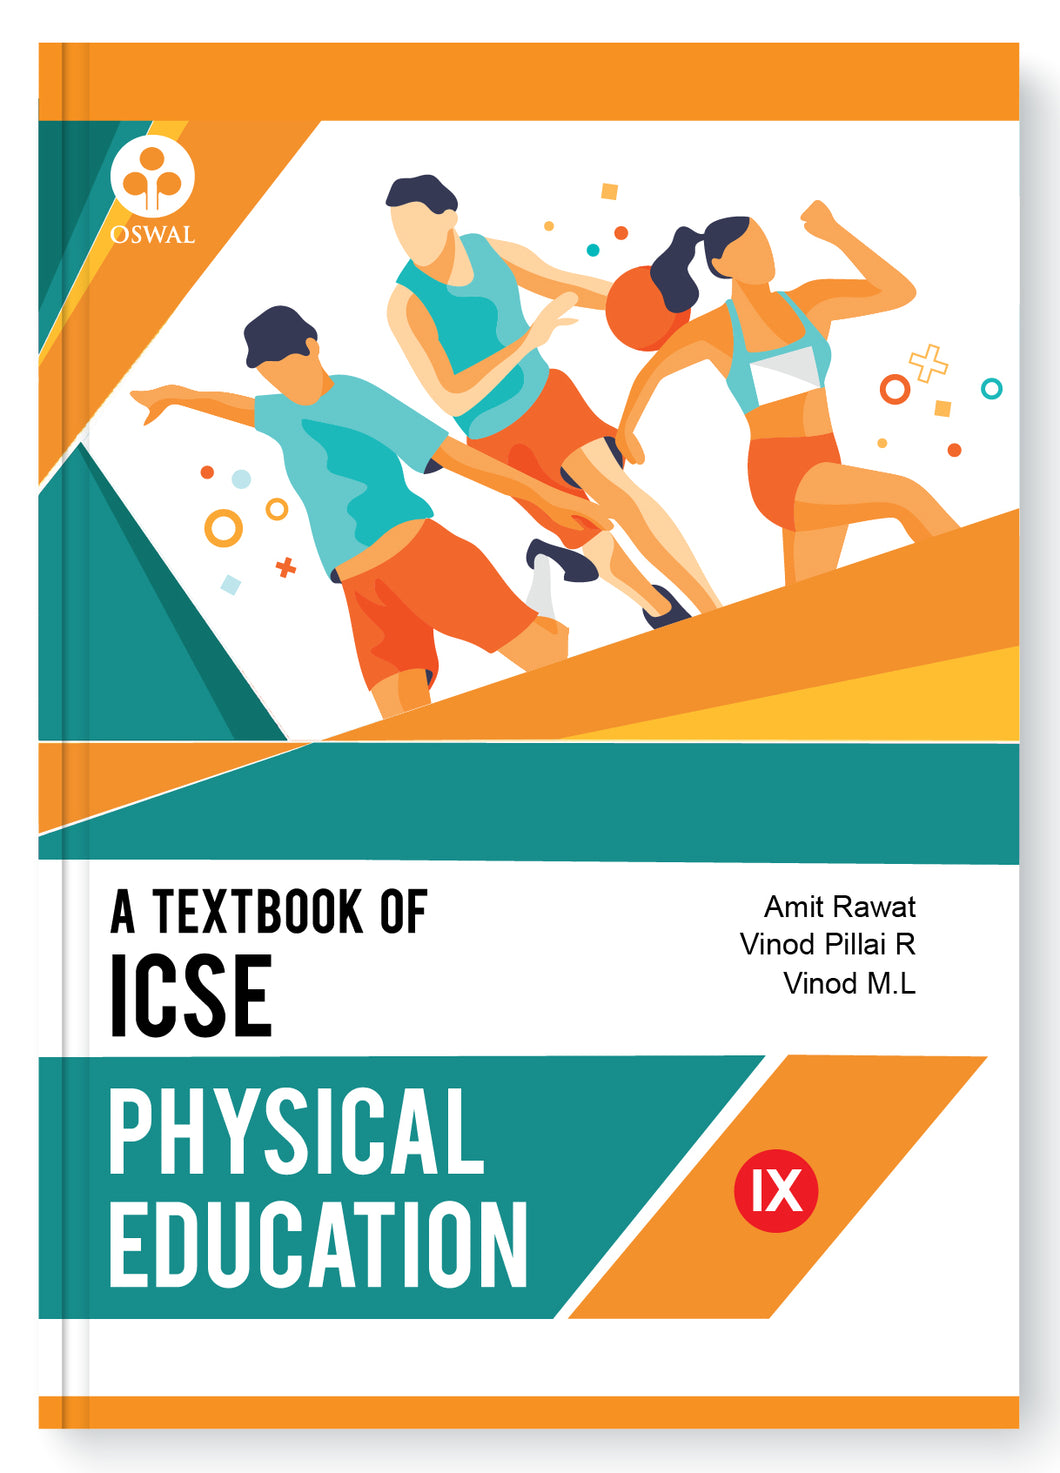 Oswal Physical Education Textbook for ICSE Class 9 : By Amit Rawat, Vinod Pillai R, Vinod M.L, Latest Edition 2023-24